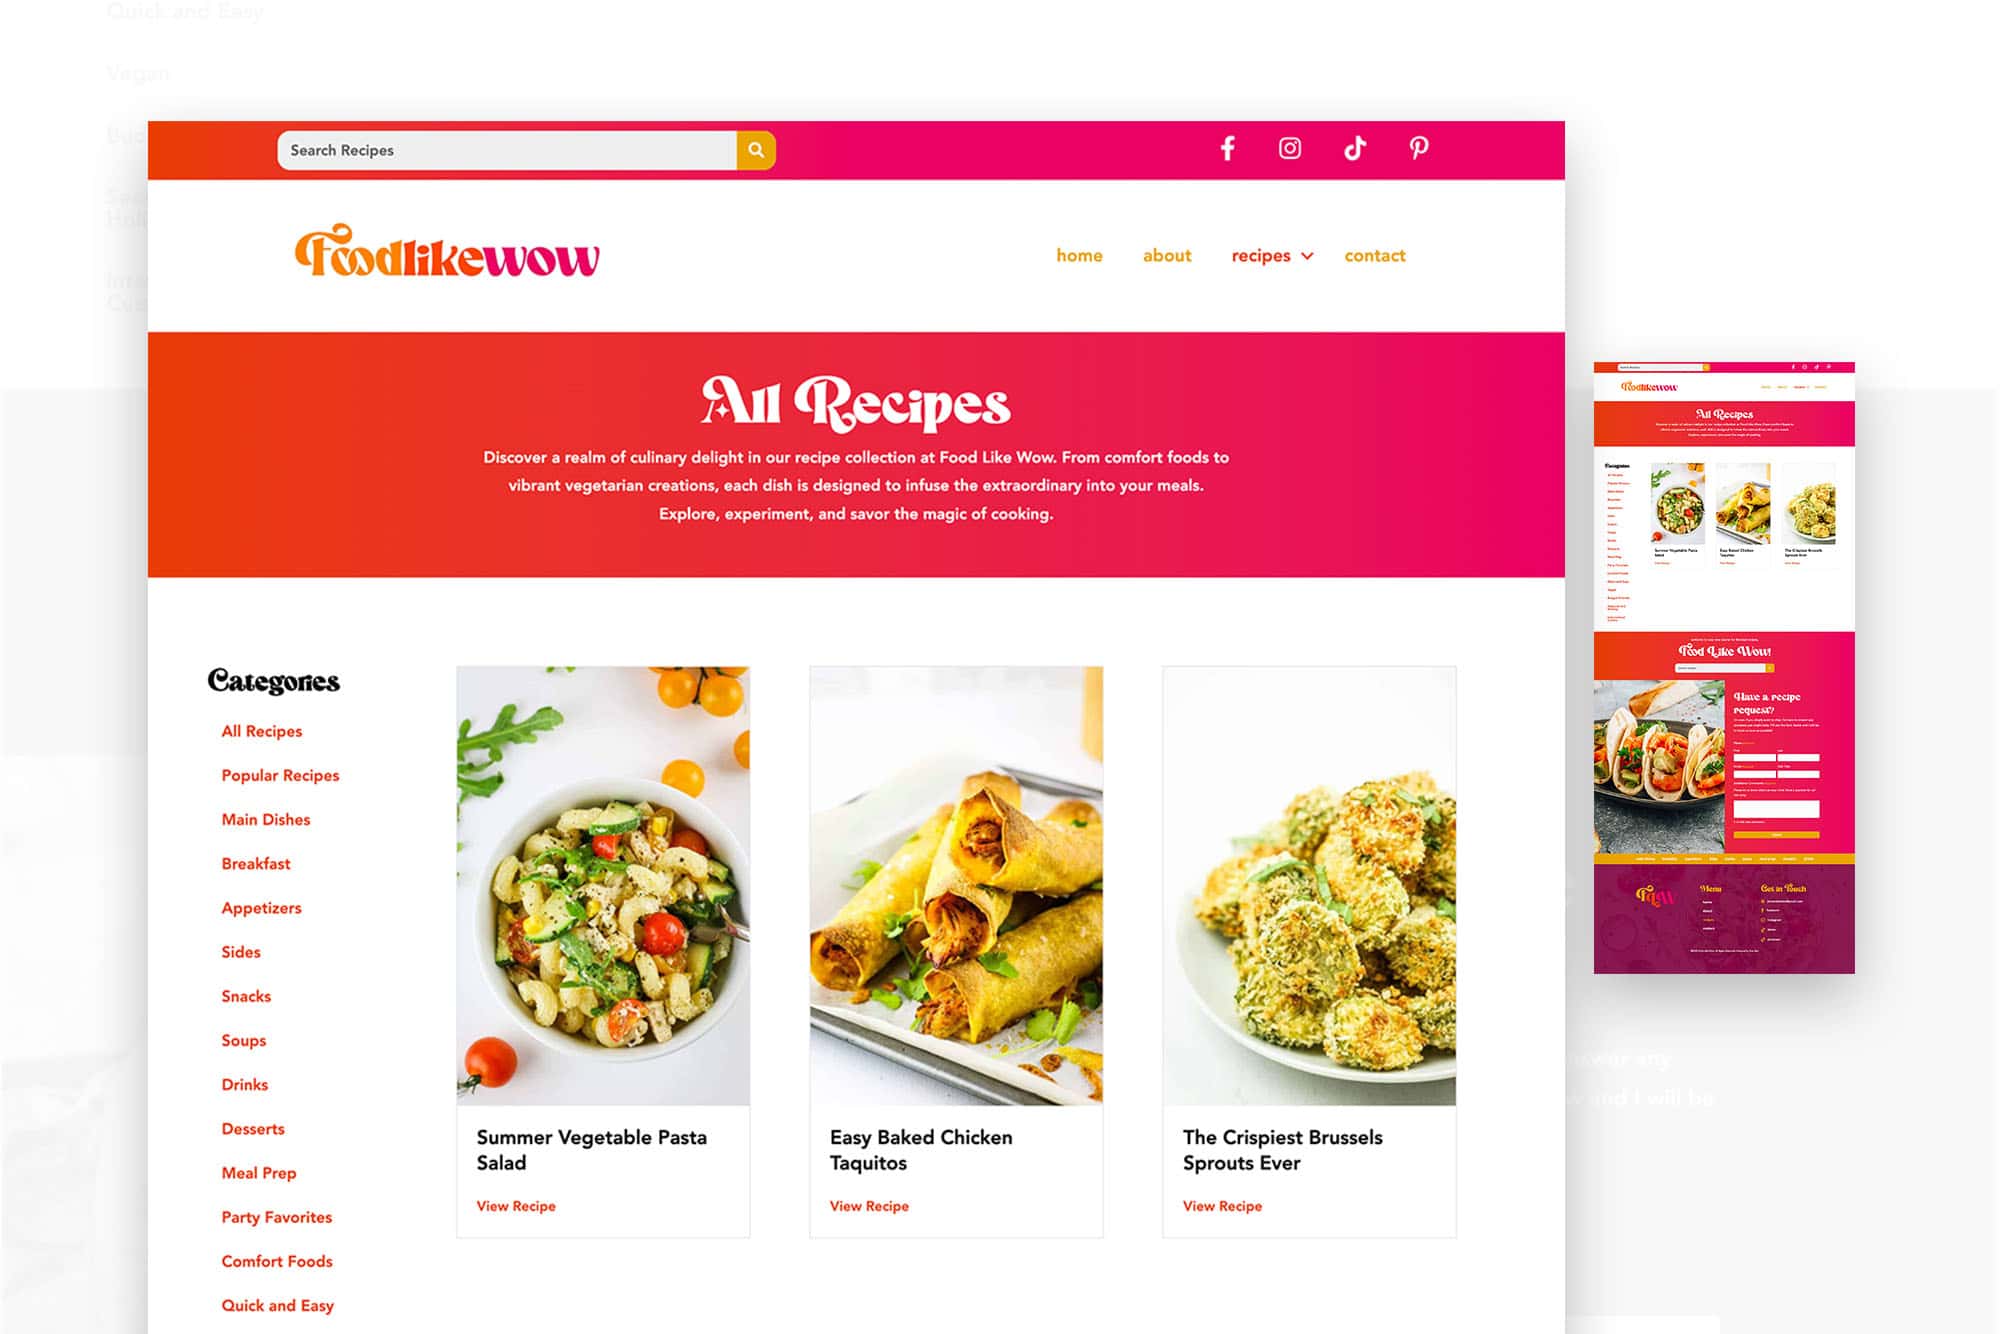 The homepage of a food website.